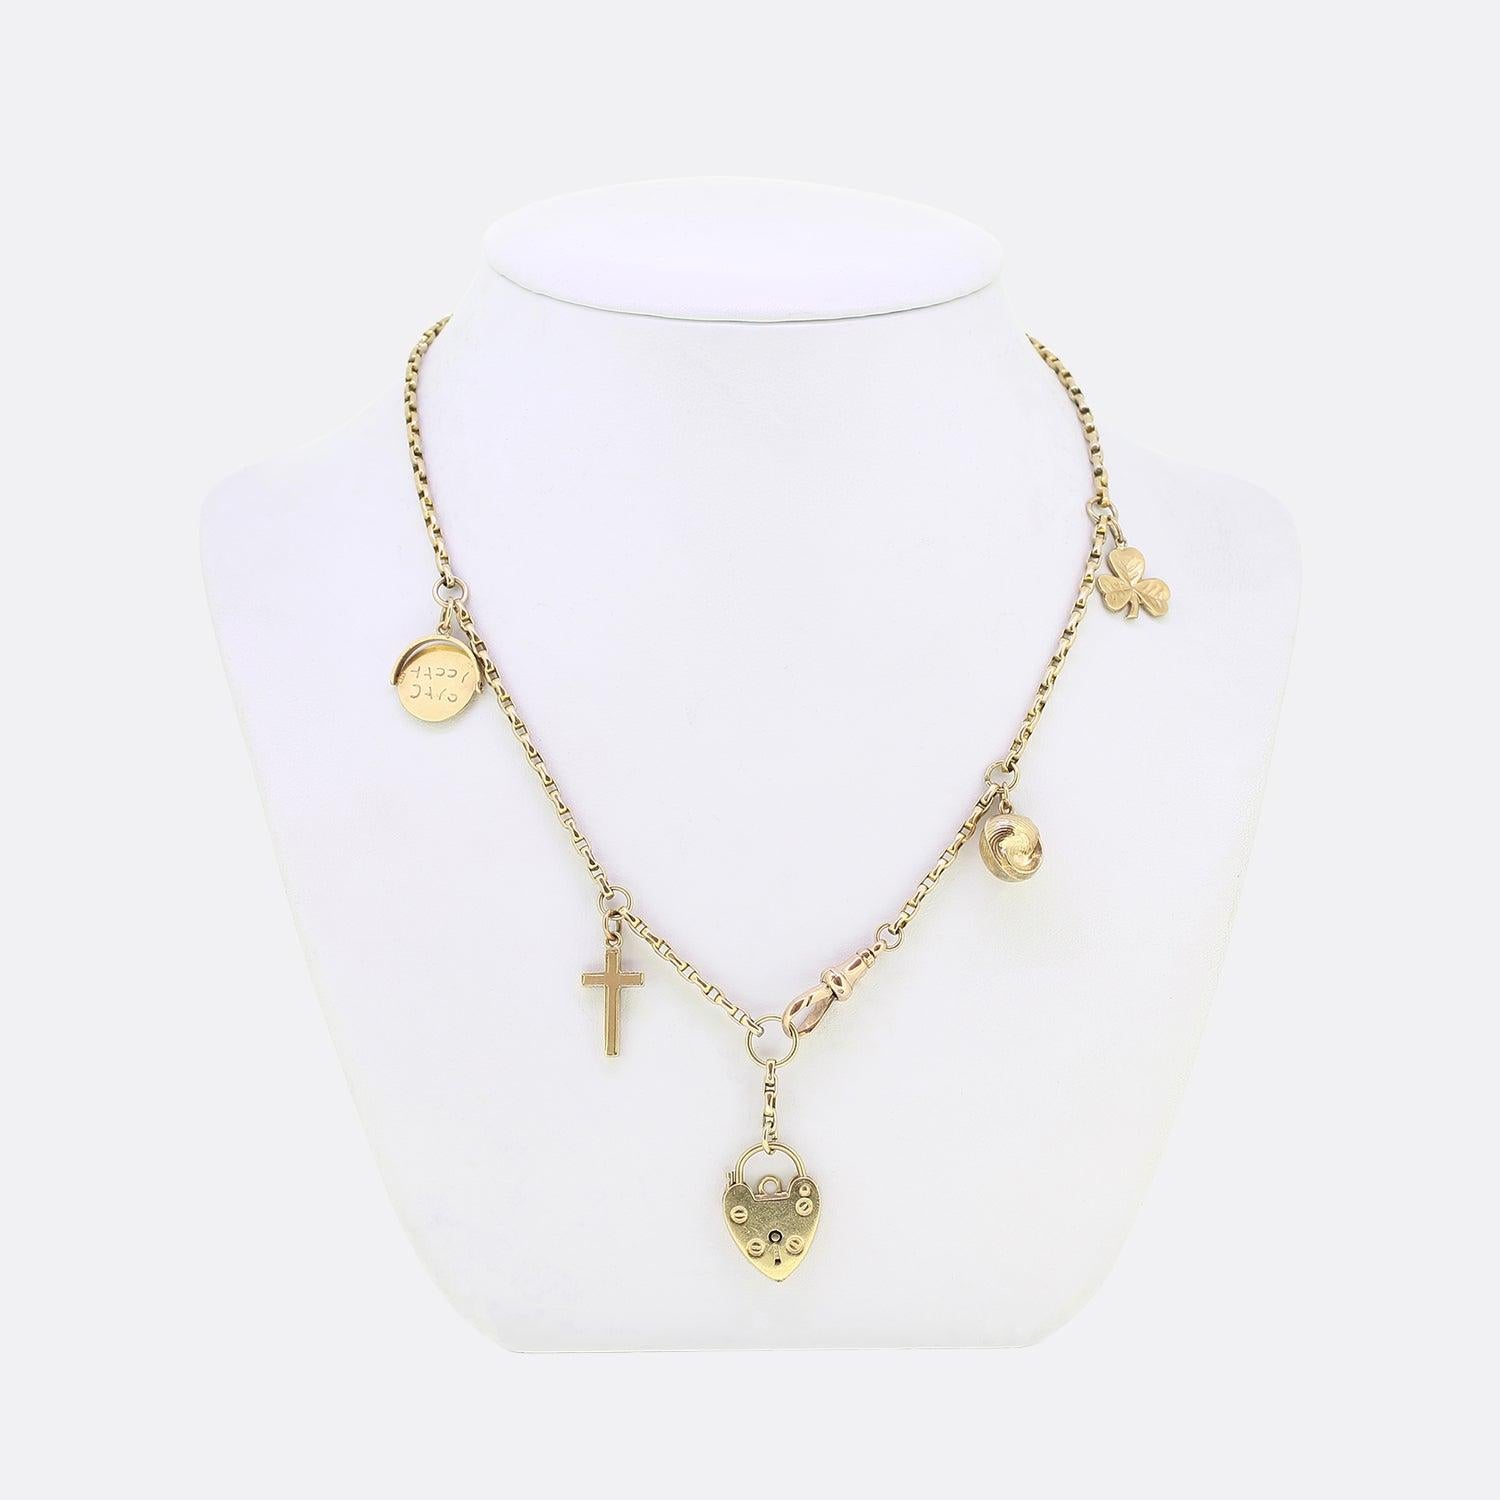 This is a vintage 9ct yellow gold belcher necklace. The necklace has charms attached through out the chain including a clover, a shell, a cross and a 'Happy Days' spinner. The necklace is attached securely by a swivel clasp.  

Condition: Used (Very